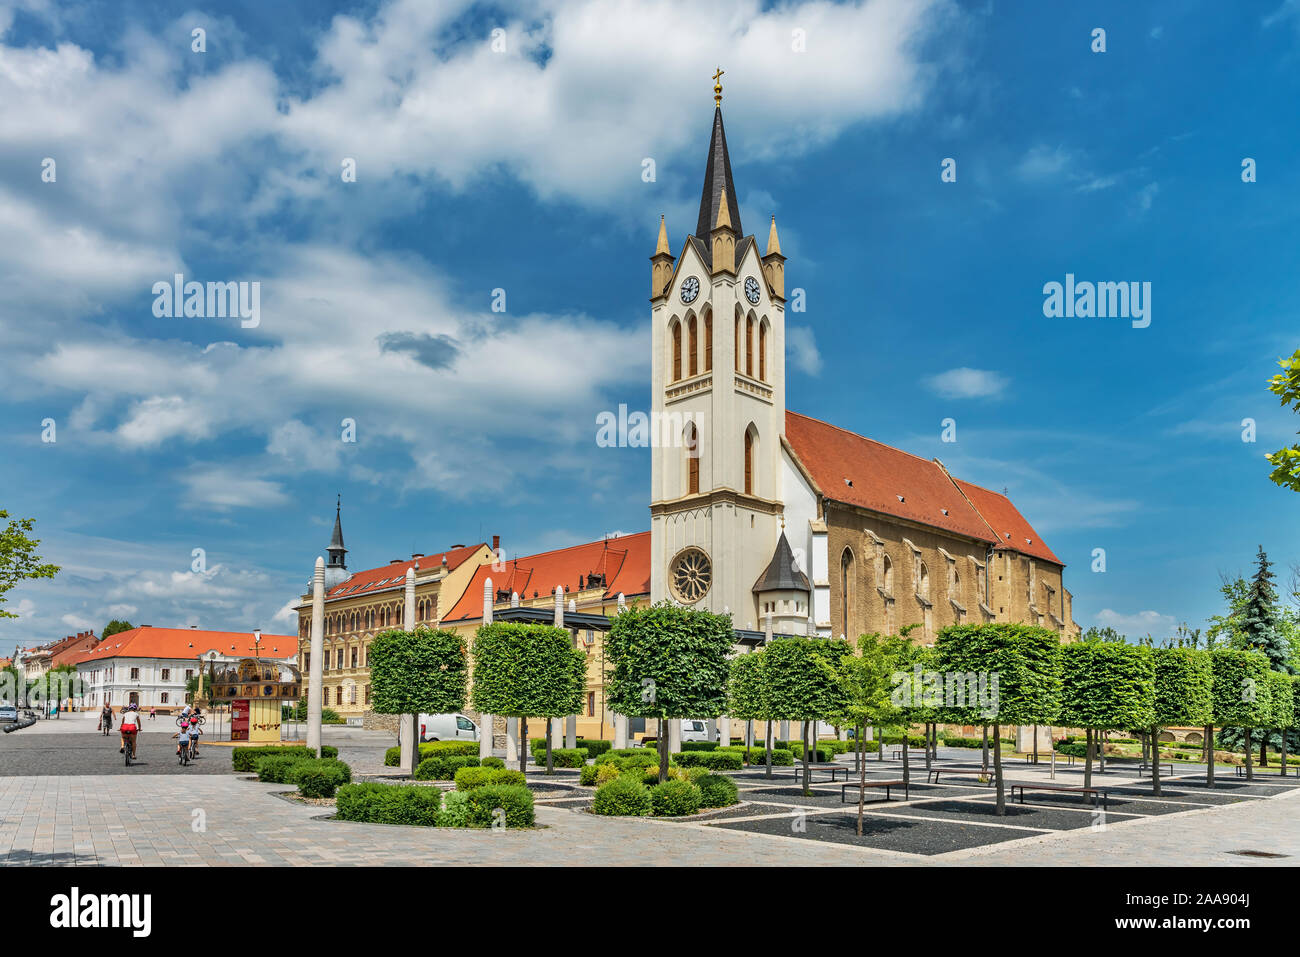 The Church of Our Lady of Hungary (Magyarok Nagyasszonya templomot) is located on the main square Fo Ter in Keszthely, Hungary, Europe Stock Photo